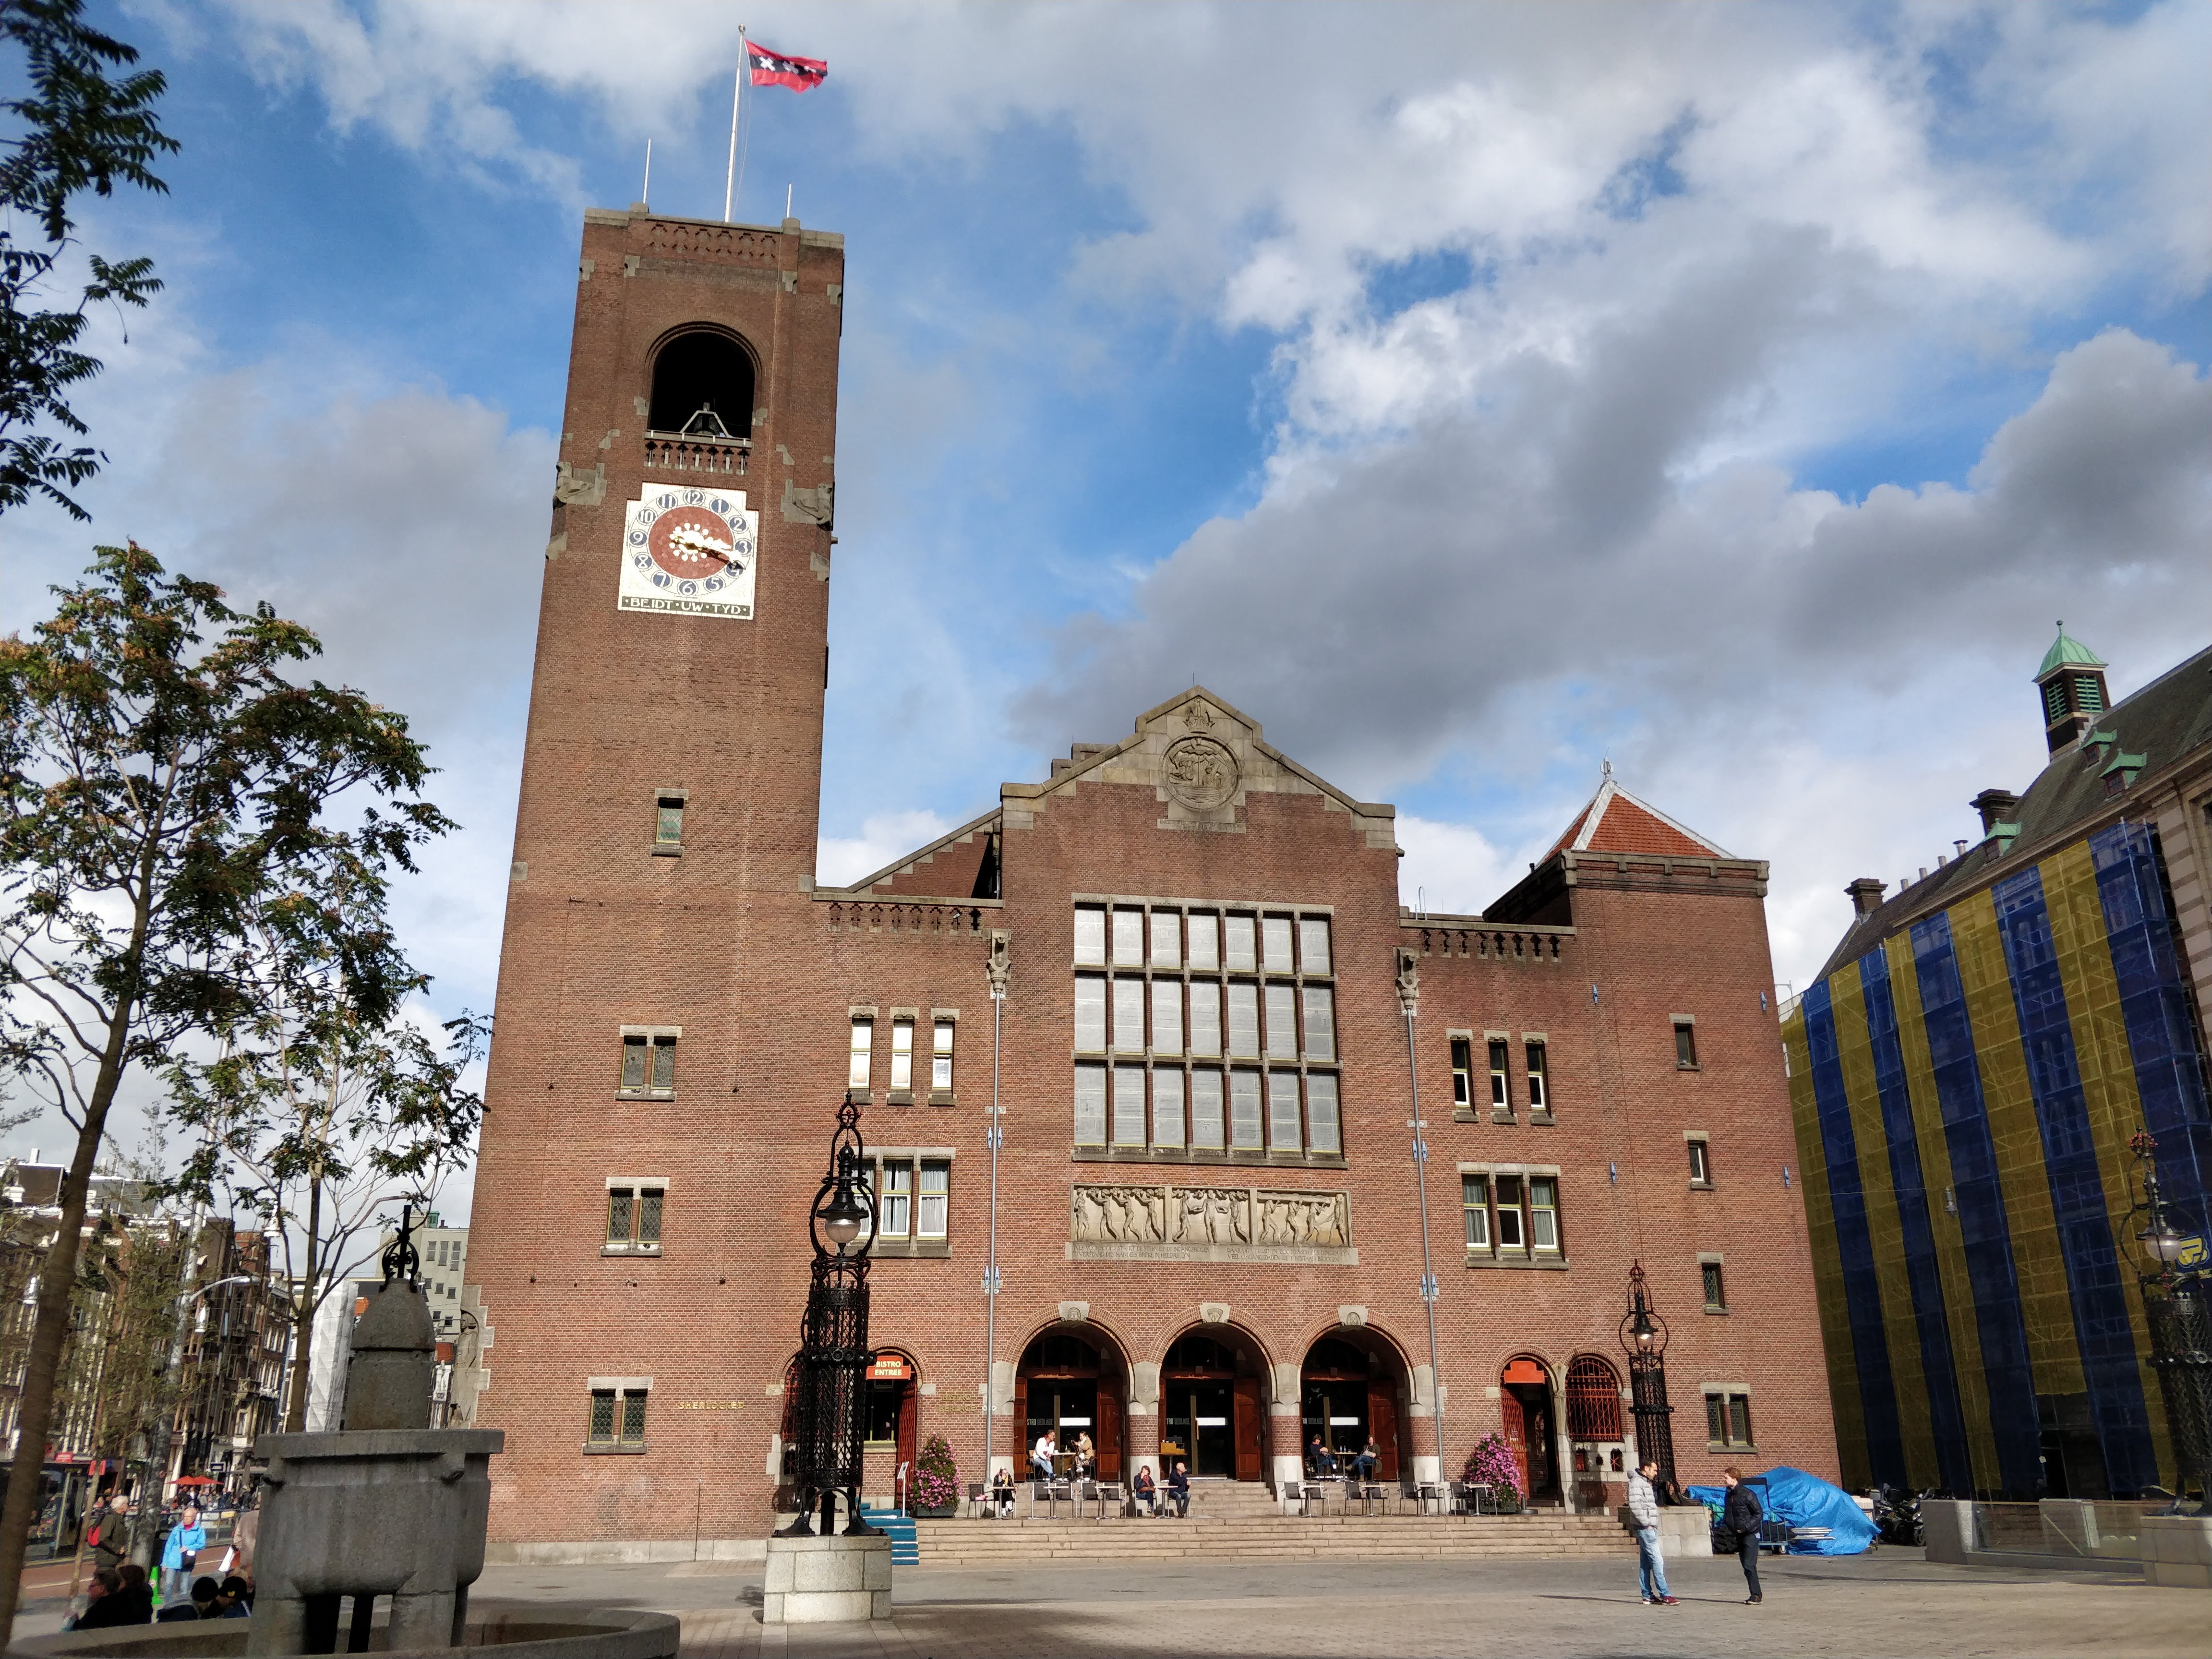 The Beurs Van Berlage from the outside